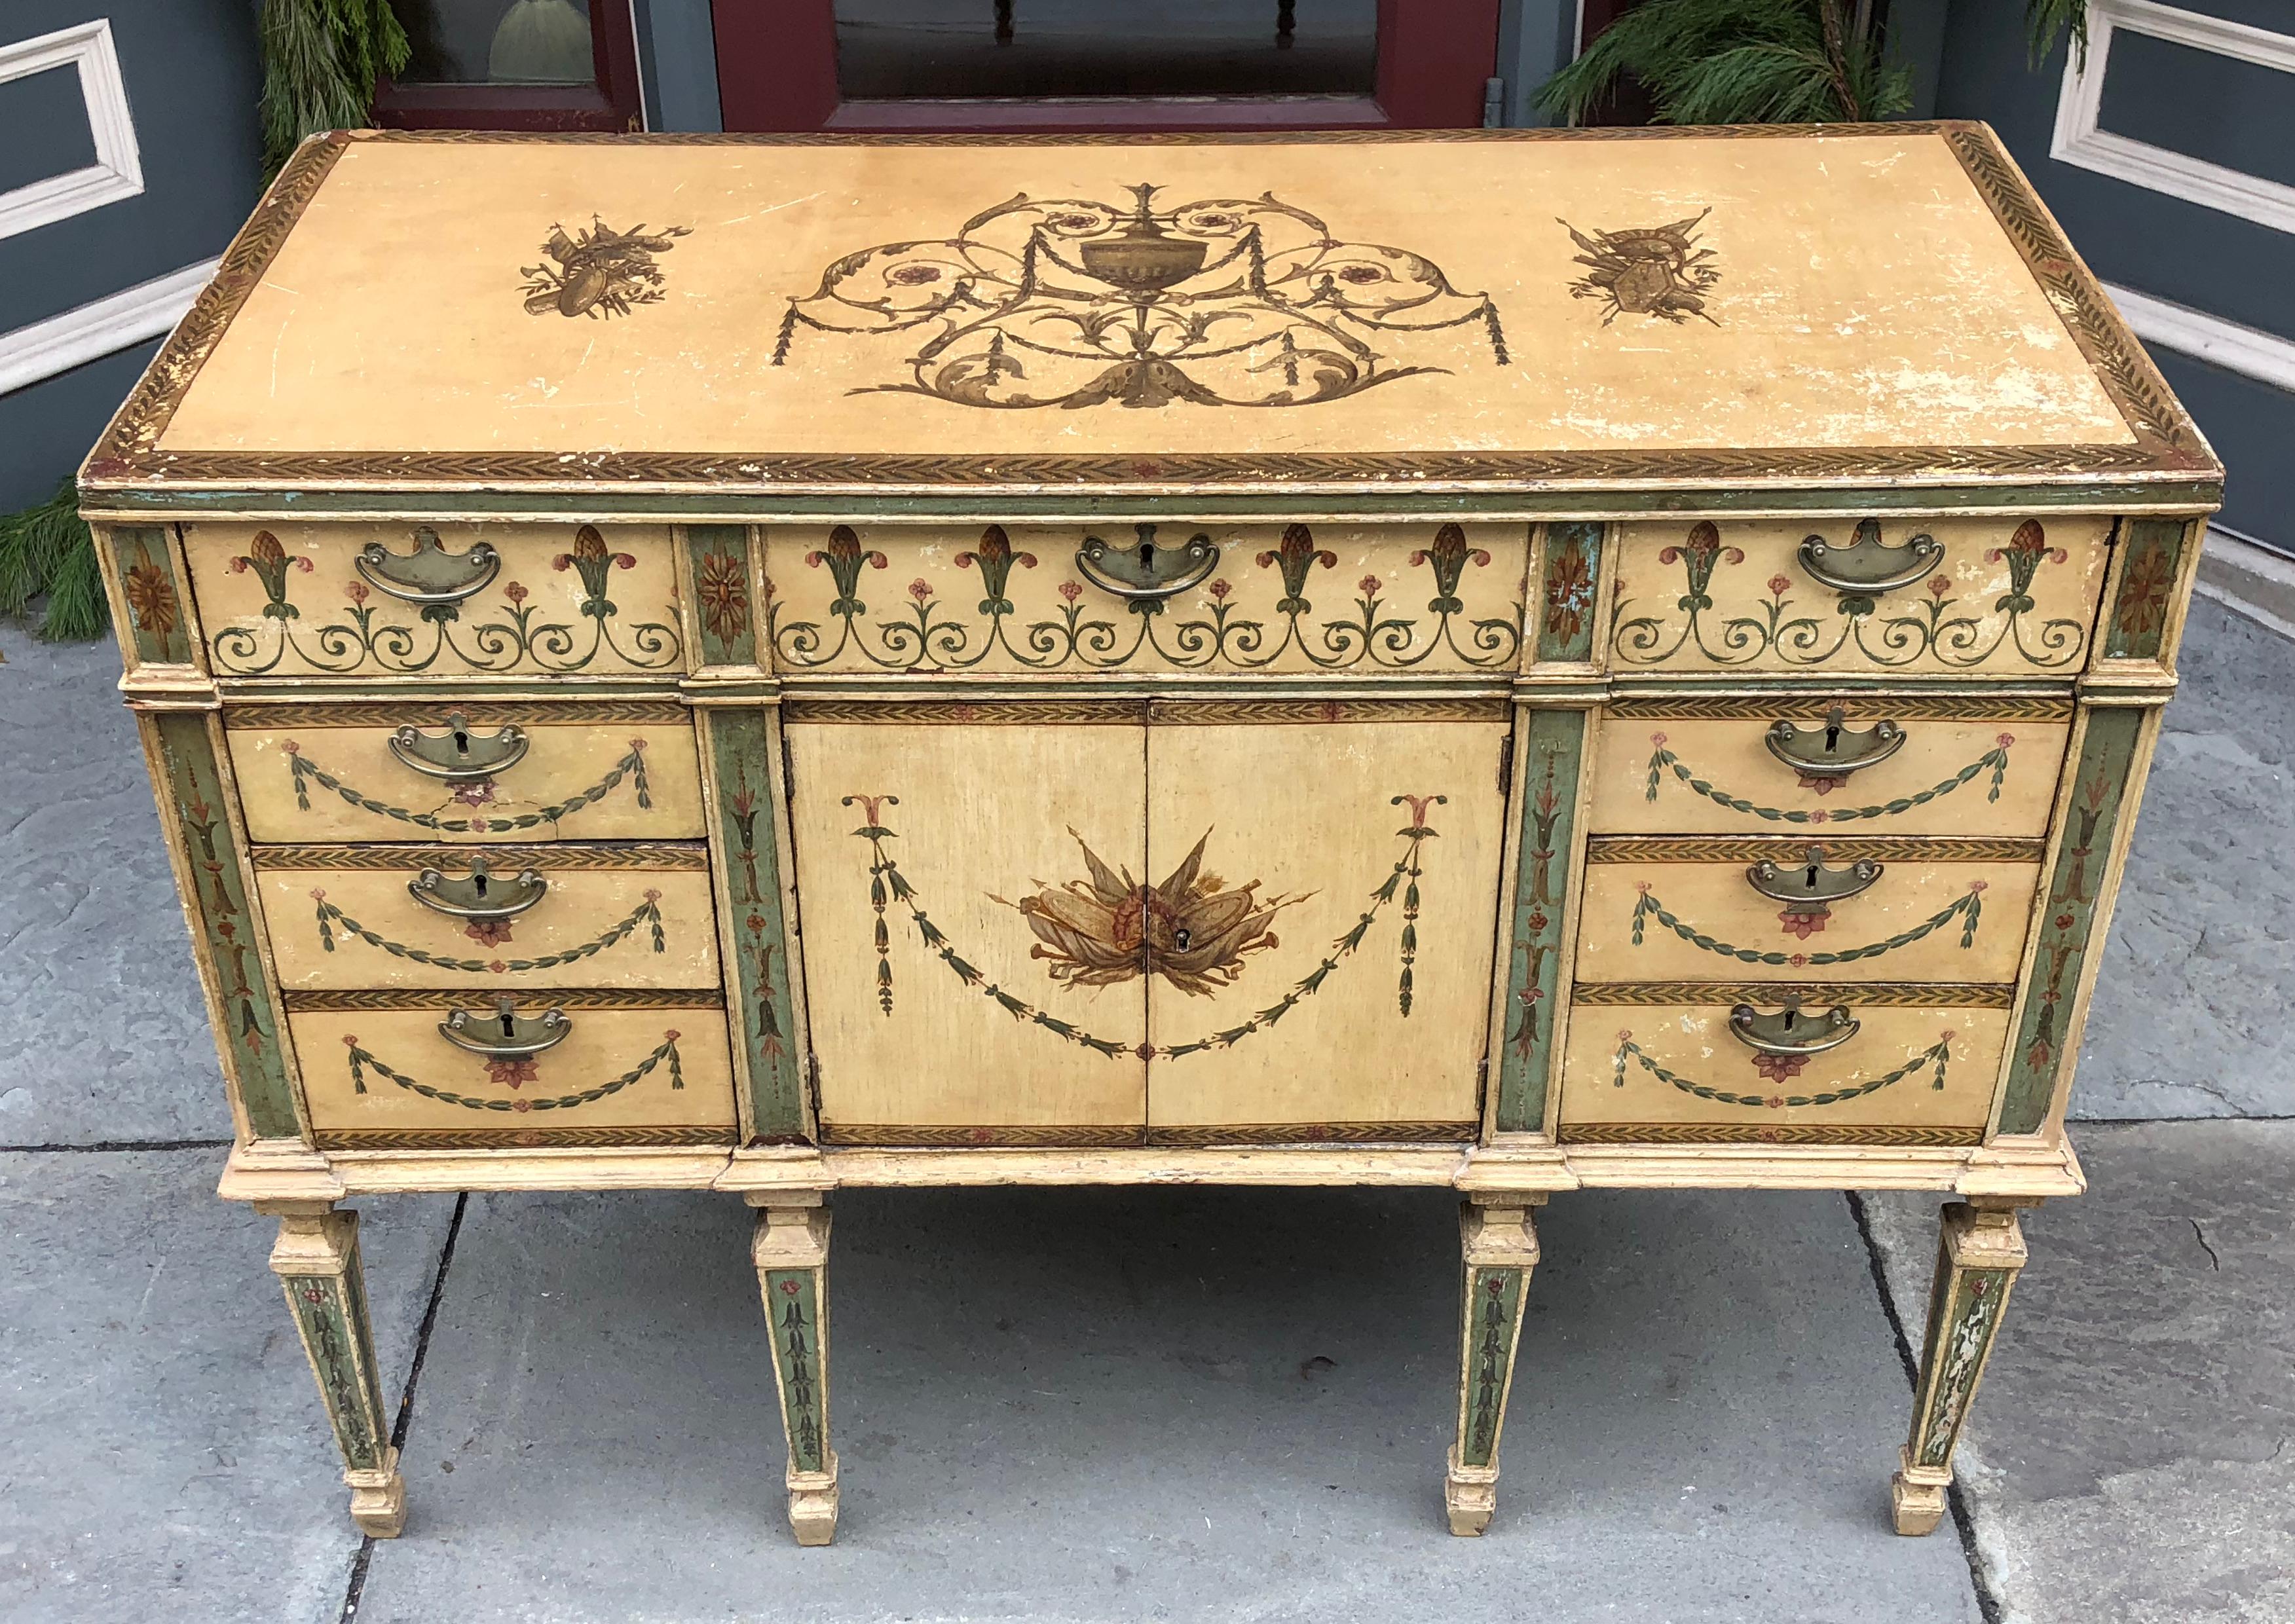 Beautiful 18th century English Adams painted commode. Single top drawer over the 2-door cupboard with 3 drawers on either side of the cupboard. The 18th century nickel pulls were added at a later date. Wonderful colors of the Adams period, minor